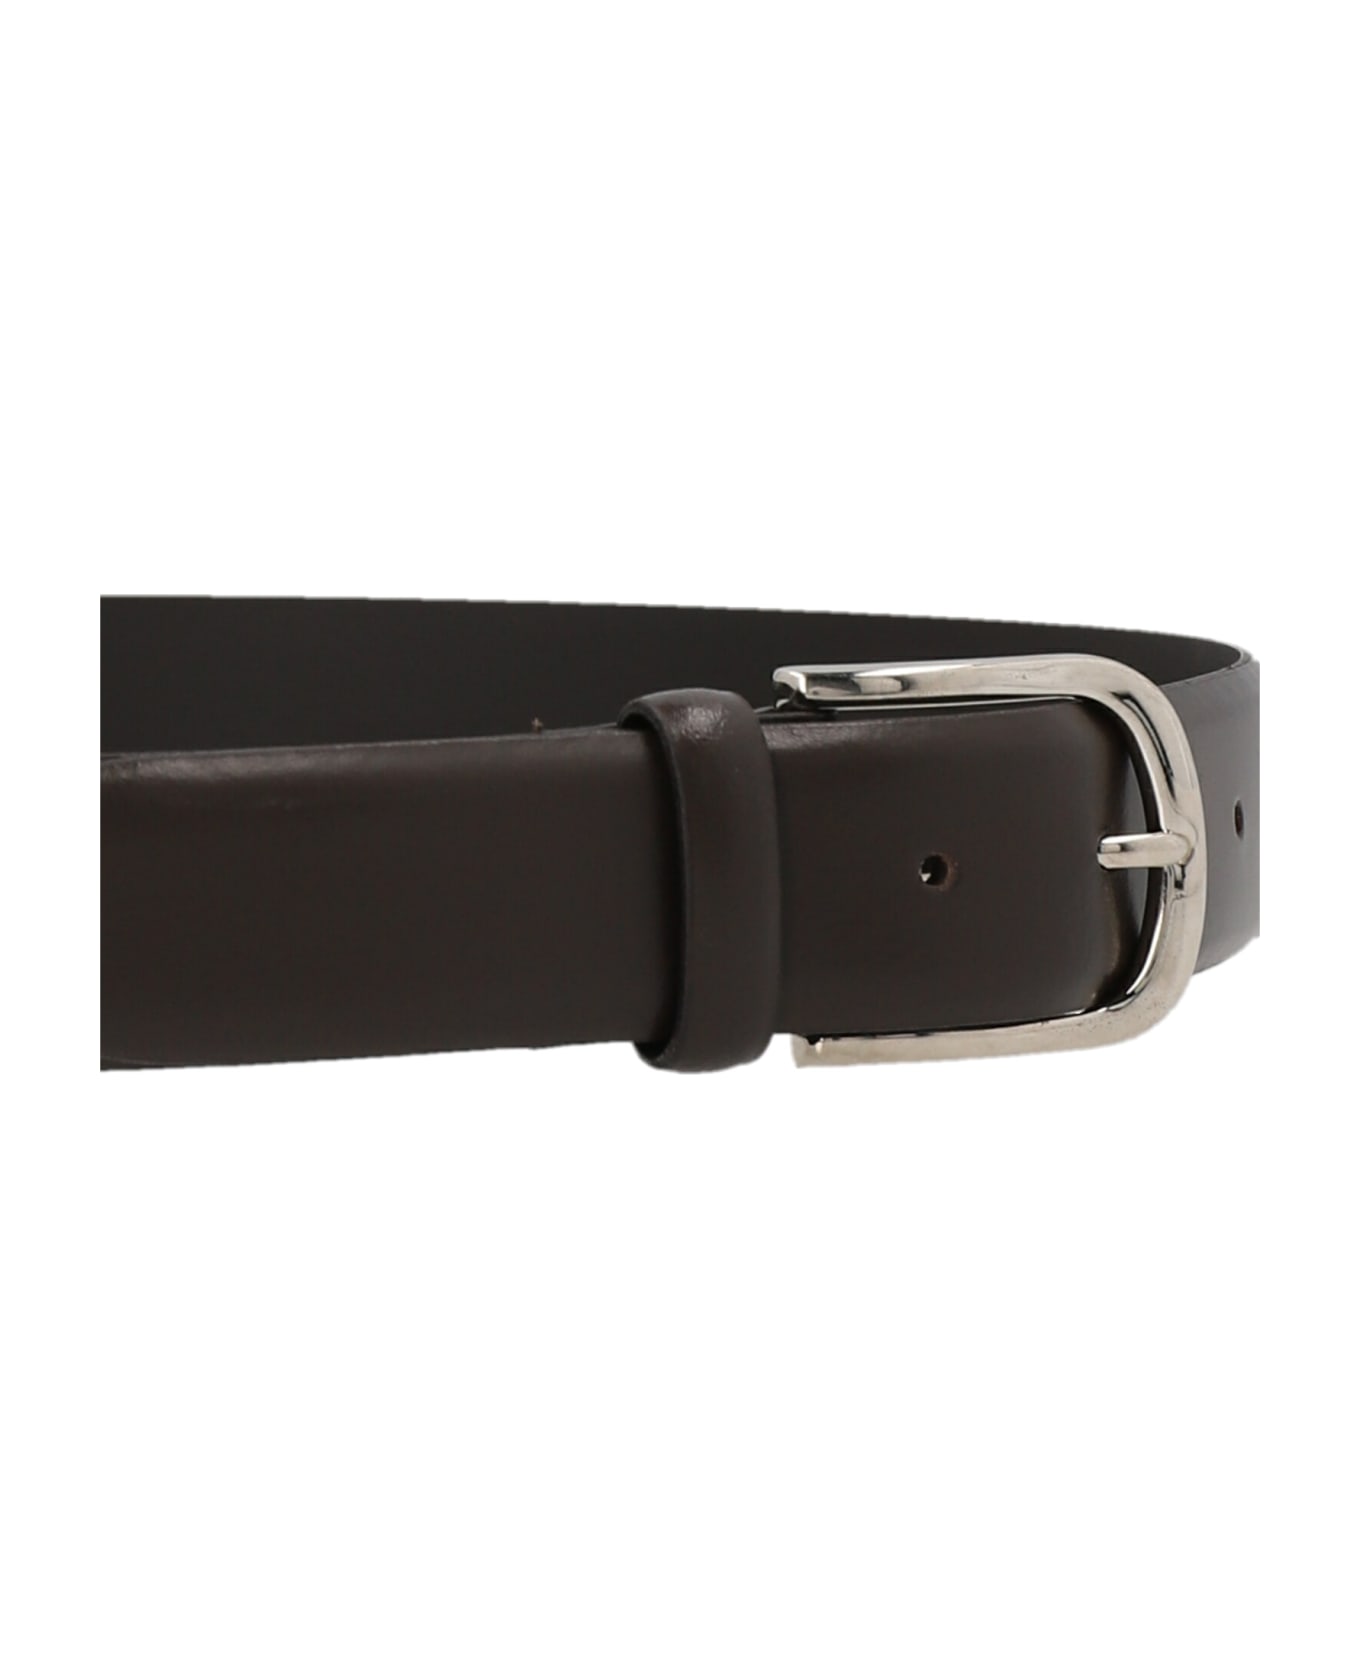 D'Amico Leather Belt - Brown